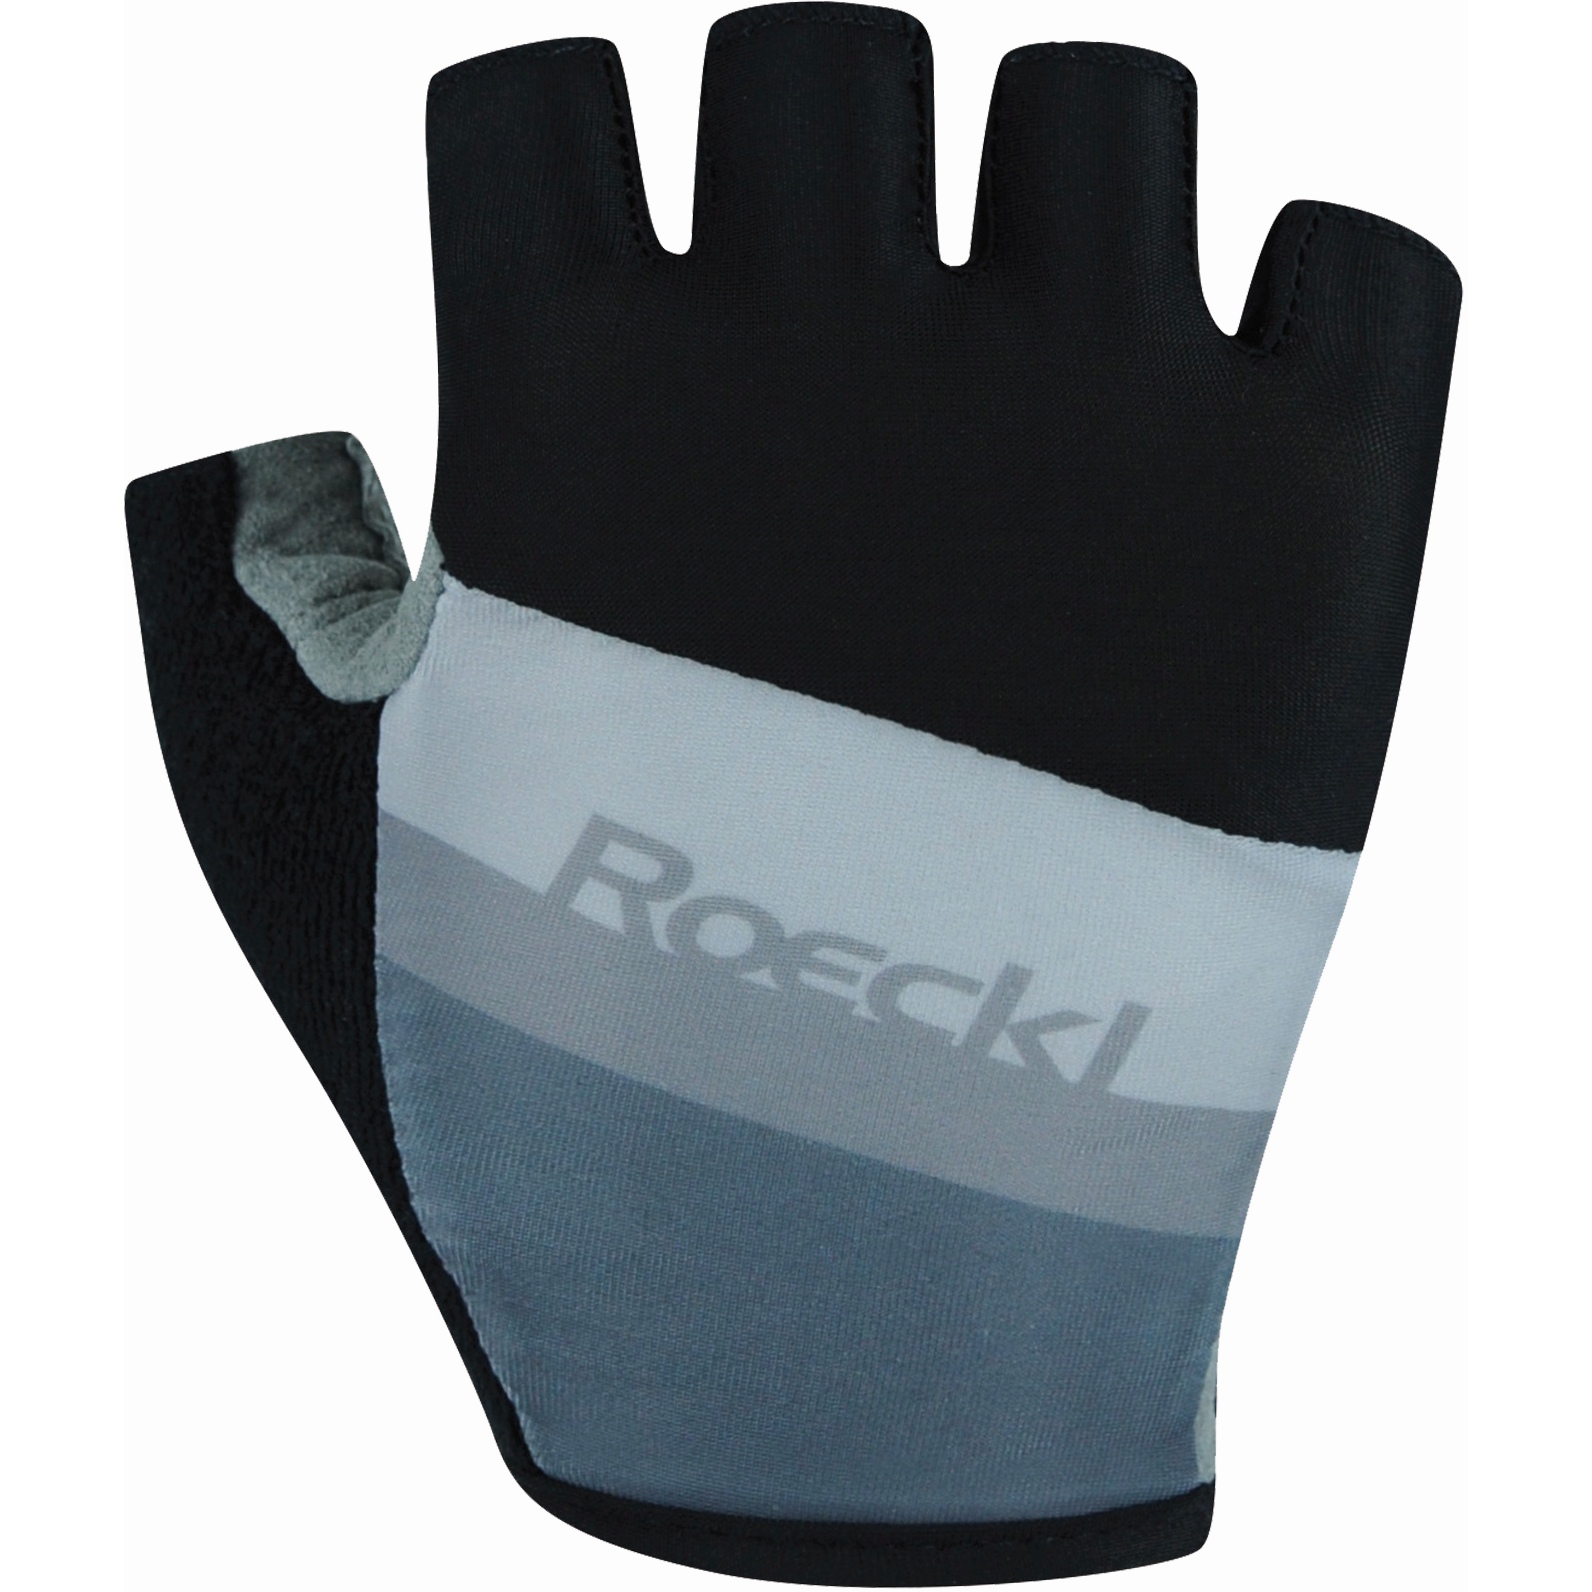 Picture of Roeckl Sports Ticino Kids Cycling Gloves - black 000